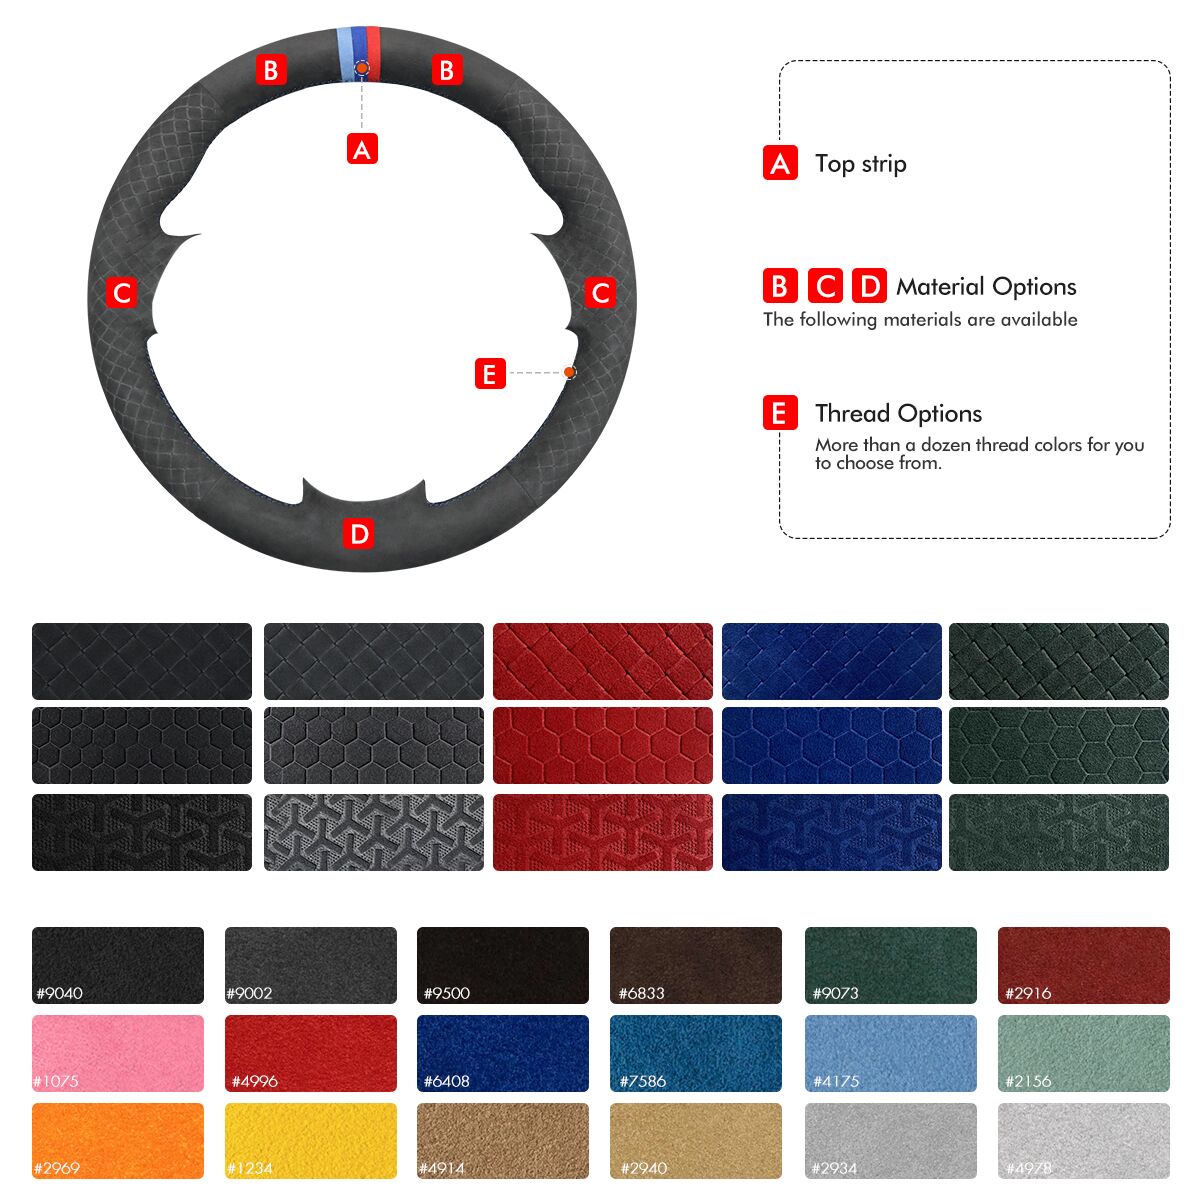 MEWANT Leather Suede Carbon Fiber Car Steering Wheel Cover for Toyota 86 (GT86) 2016-2020 / for Subaru BRZ 2016-2020